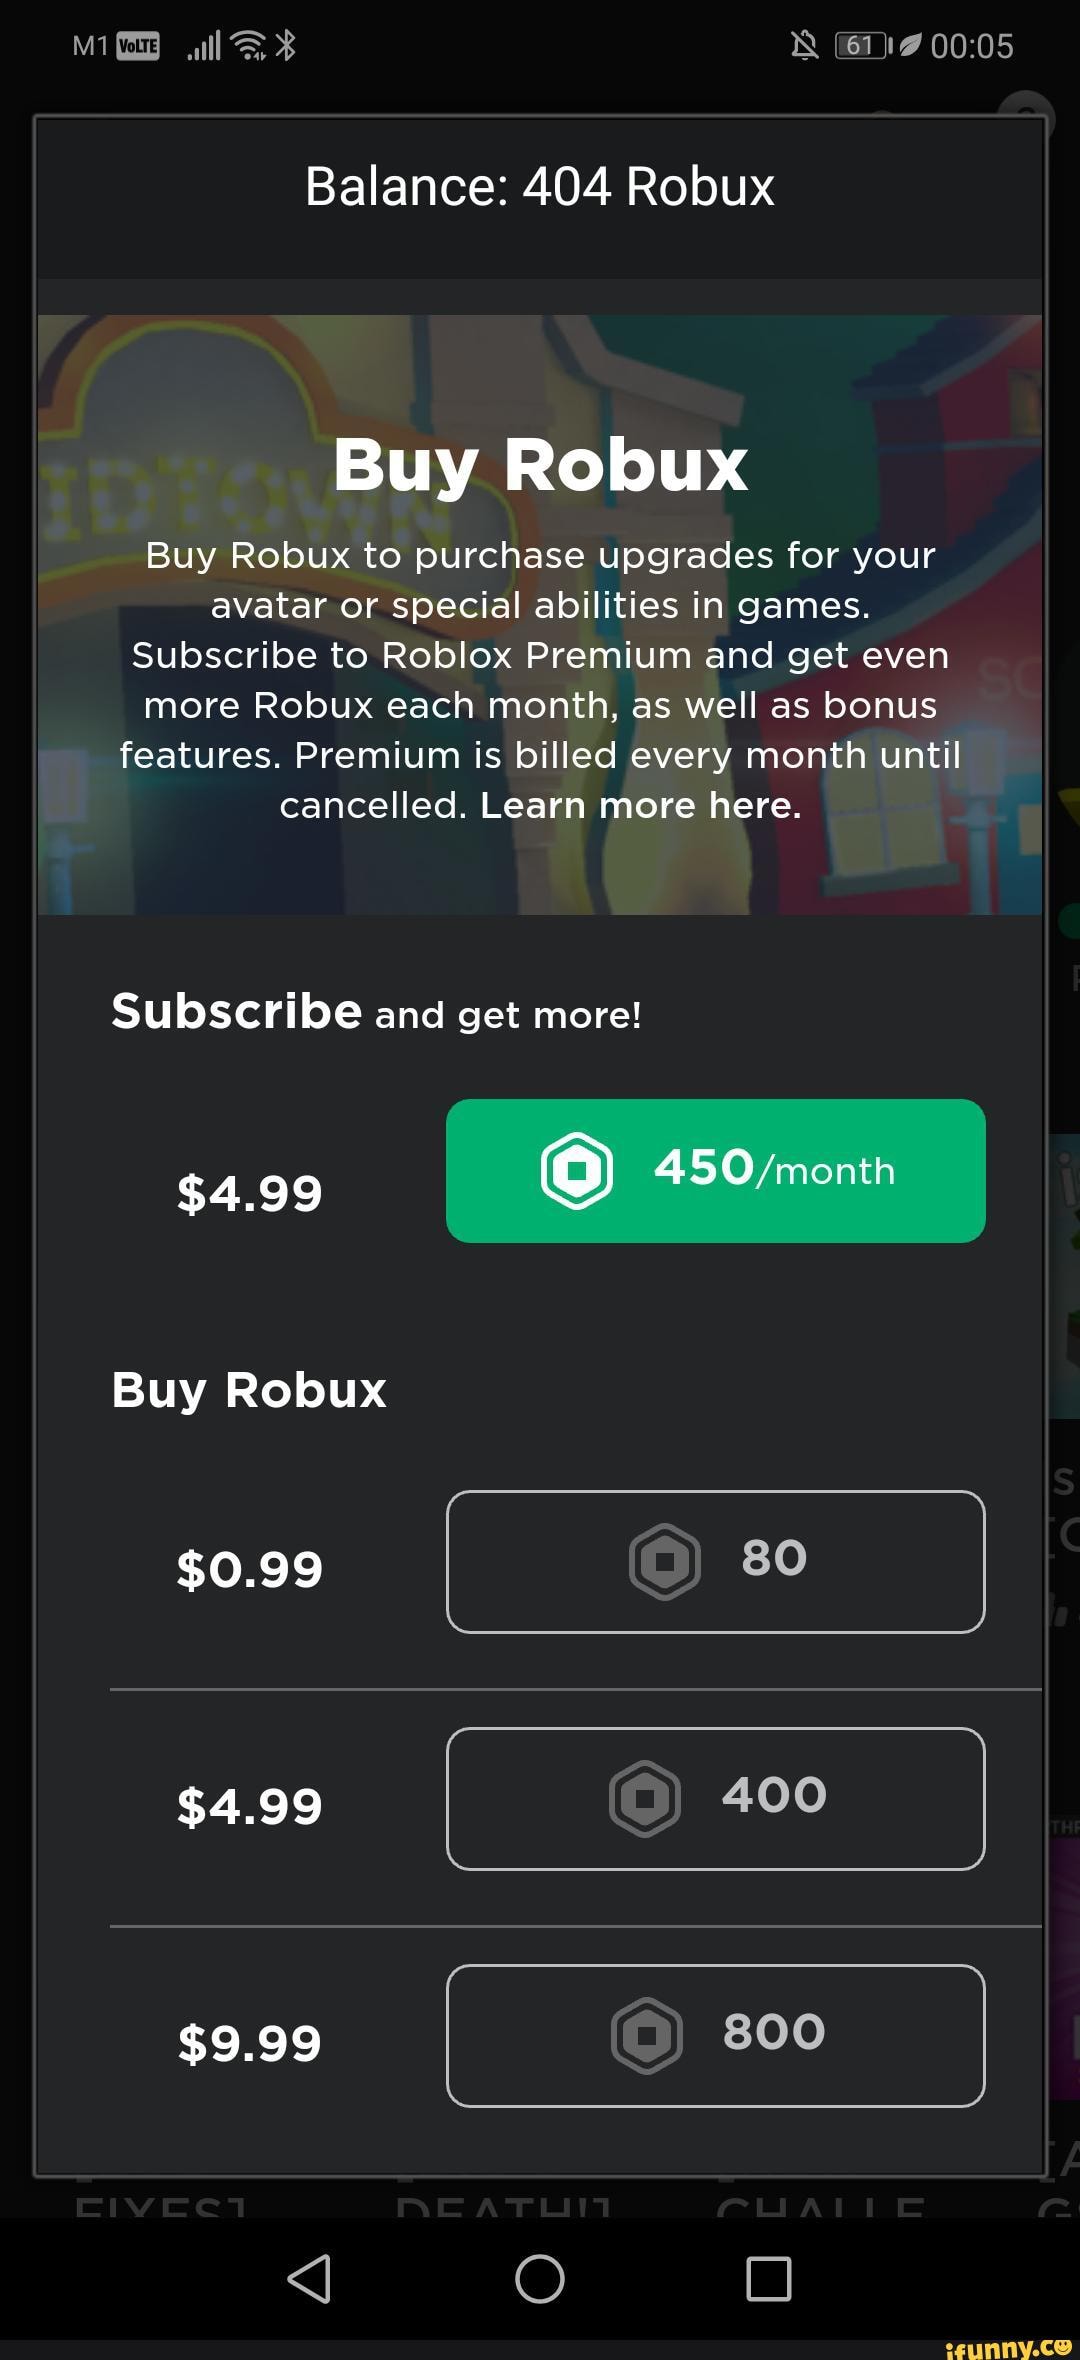 Balance 404 Robux Buy Robux Buy Robux To Purchase Upgrades For Your Avatar Or Special Abilities In Games Subscribe To Roblox Premium And Get Even More Robux Each Month As Well As - get robux to purchase upgrades